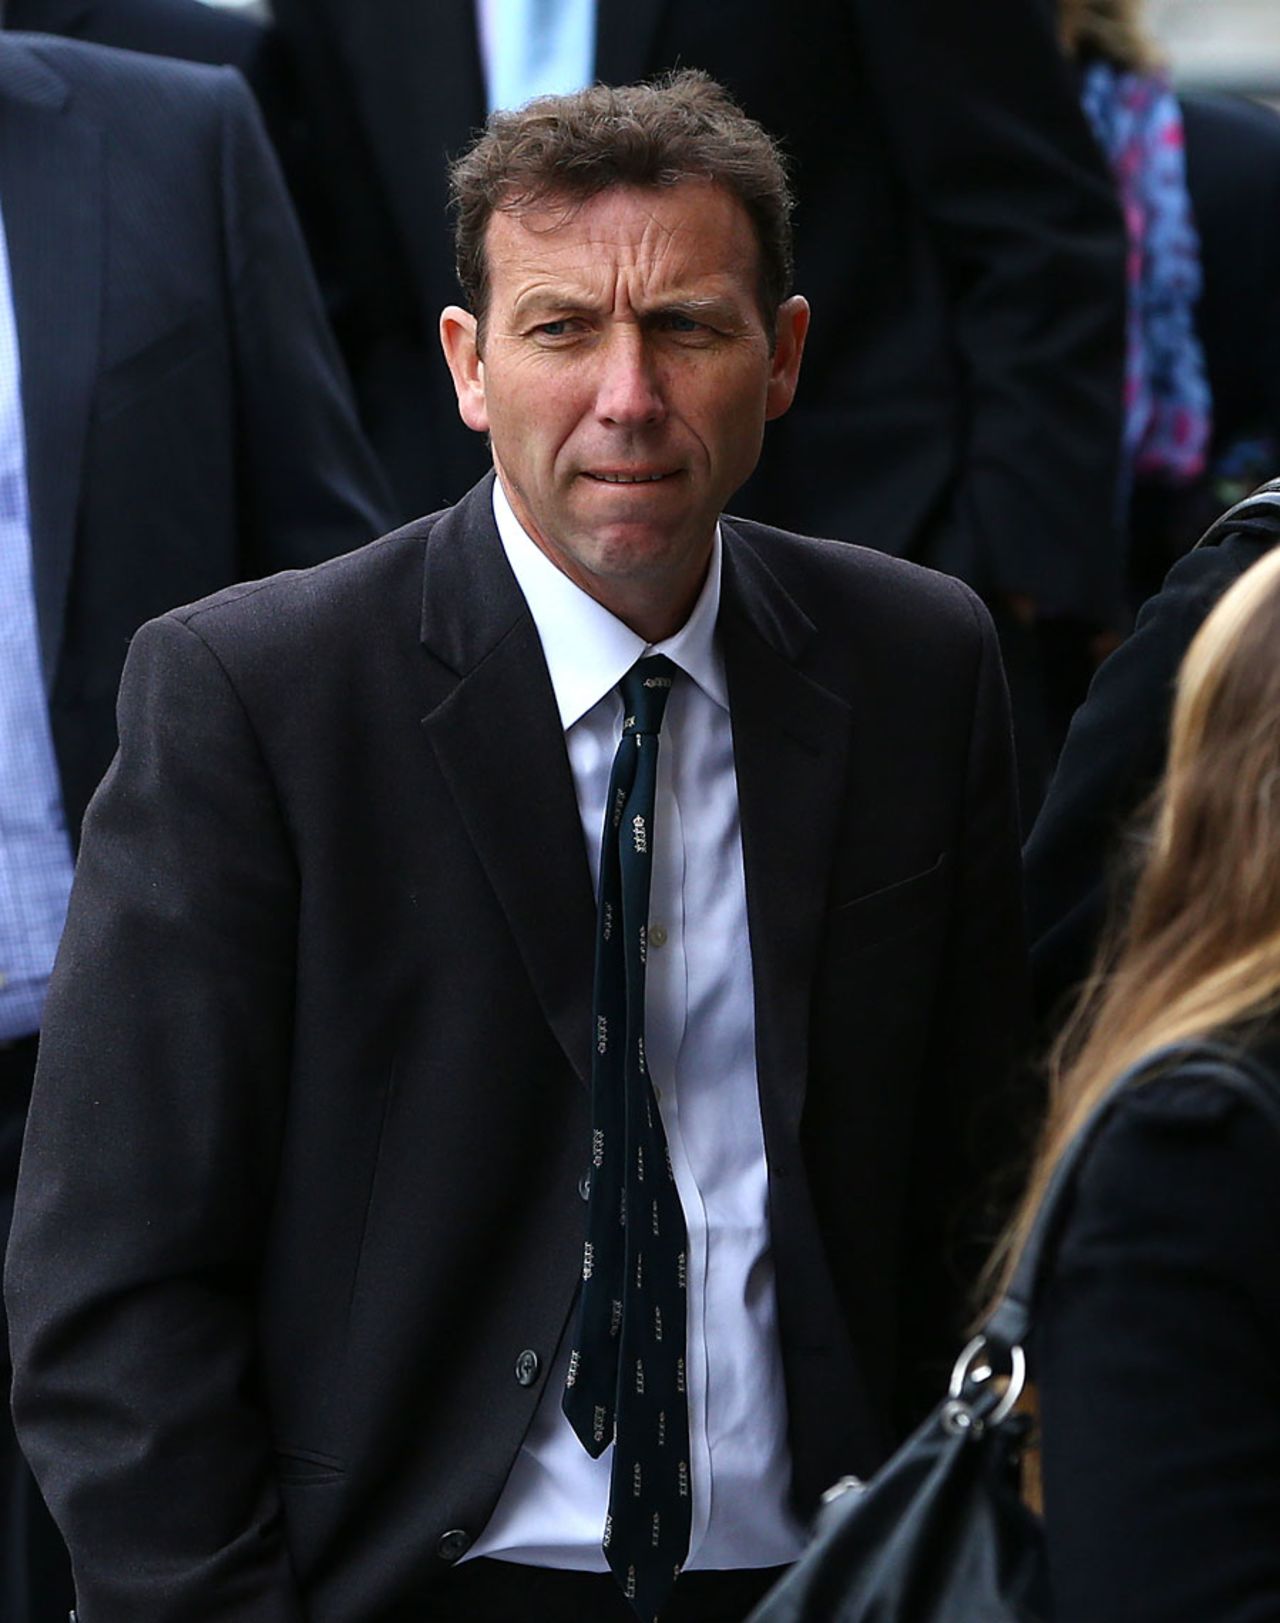 Michael Atherton, now <i>The Times</i> correspondent, was at St Paul's, London, April 16, 2013